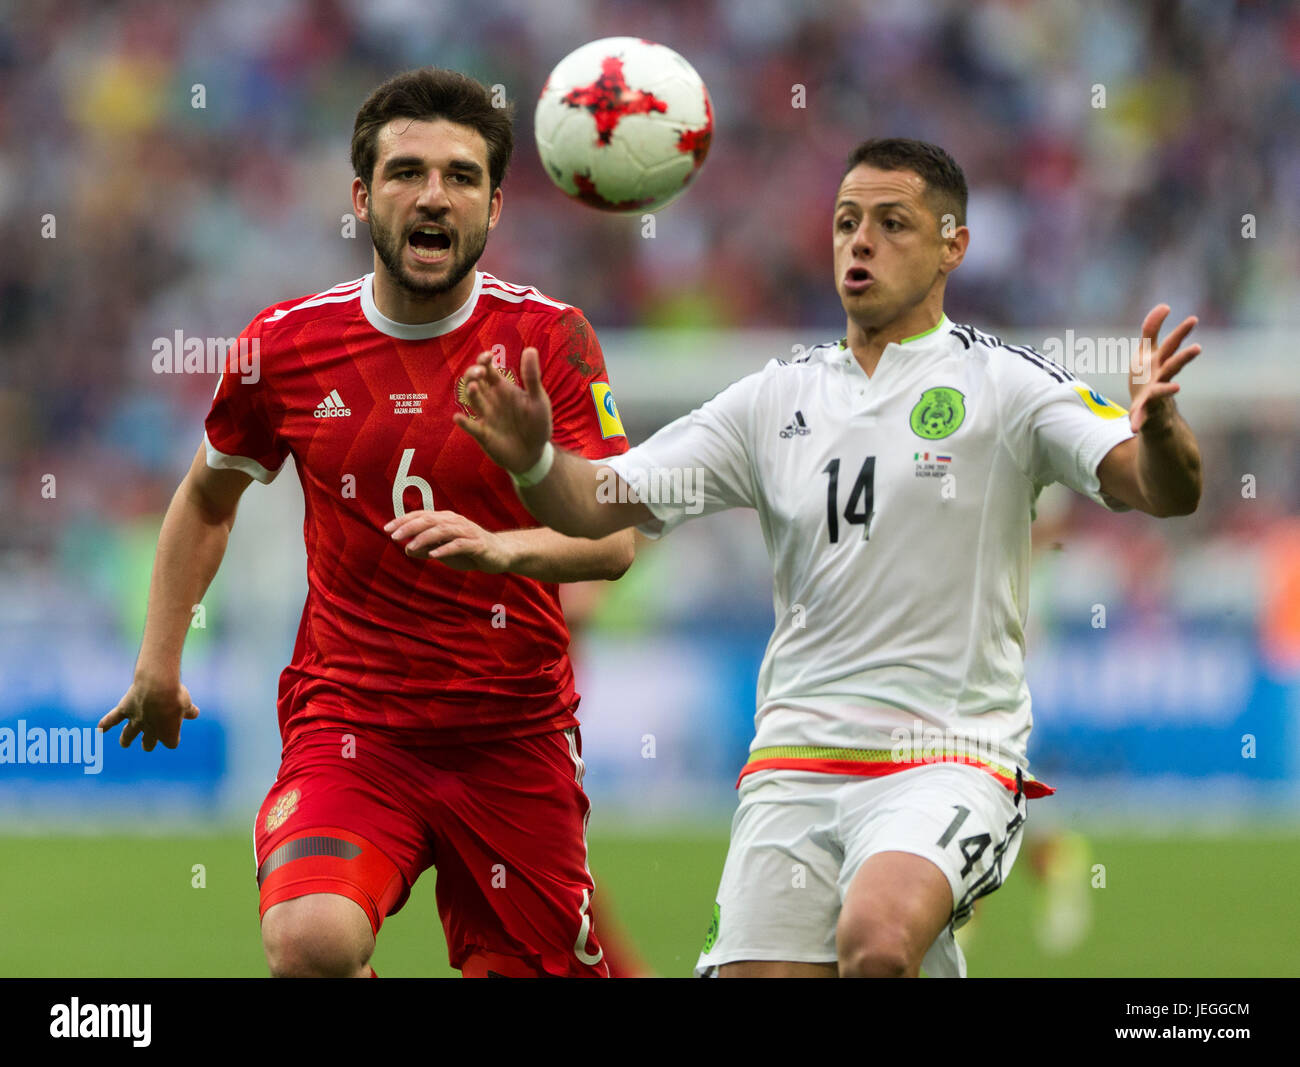 Kazan, Russia. 24th June, 2017. Javier Hernandez of Mexico vies with Georgy Dzhikya(L) of Russia during group A match between Russia and Mexico at the 2017 FIFA Confederations Cup in Kazan, Russia, on June 24, 2017. Mexico won 2-1. Credit: Bai Xueqi/Xinhua/Alamy Live News Stock Photo